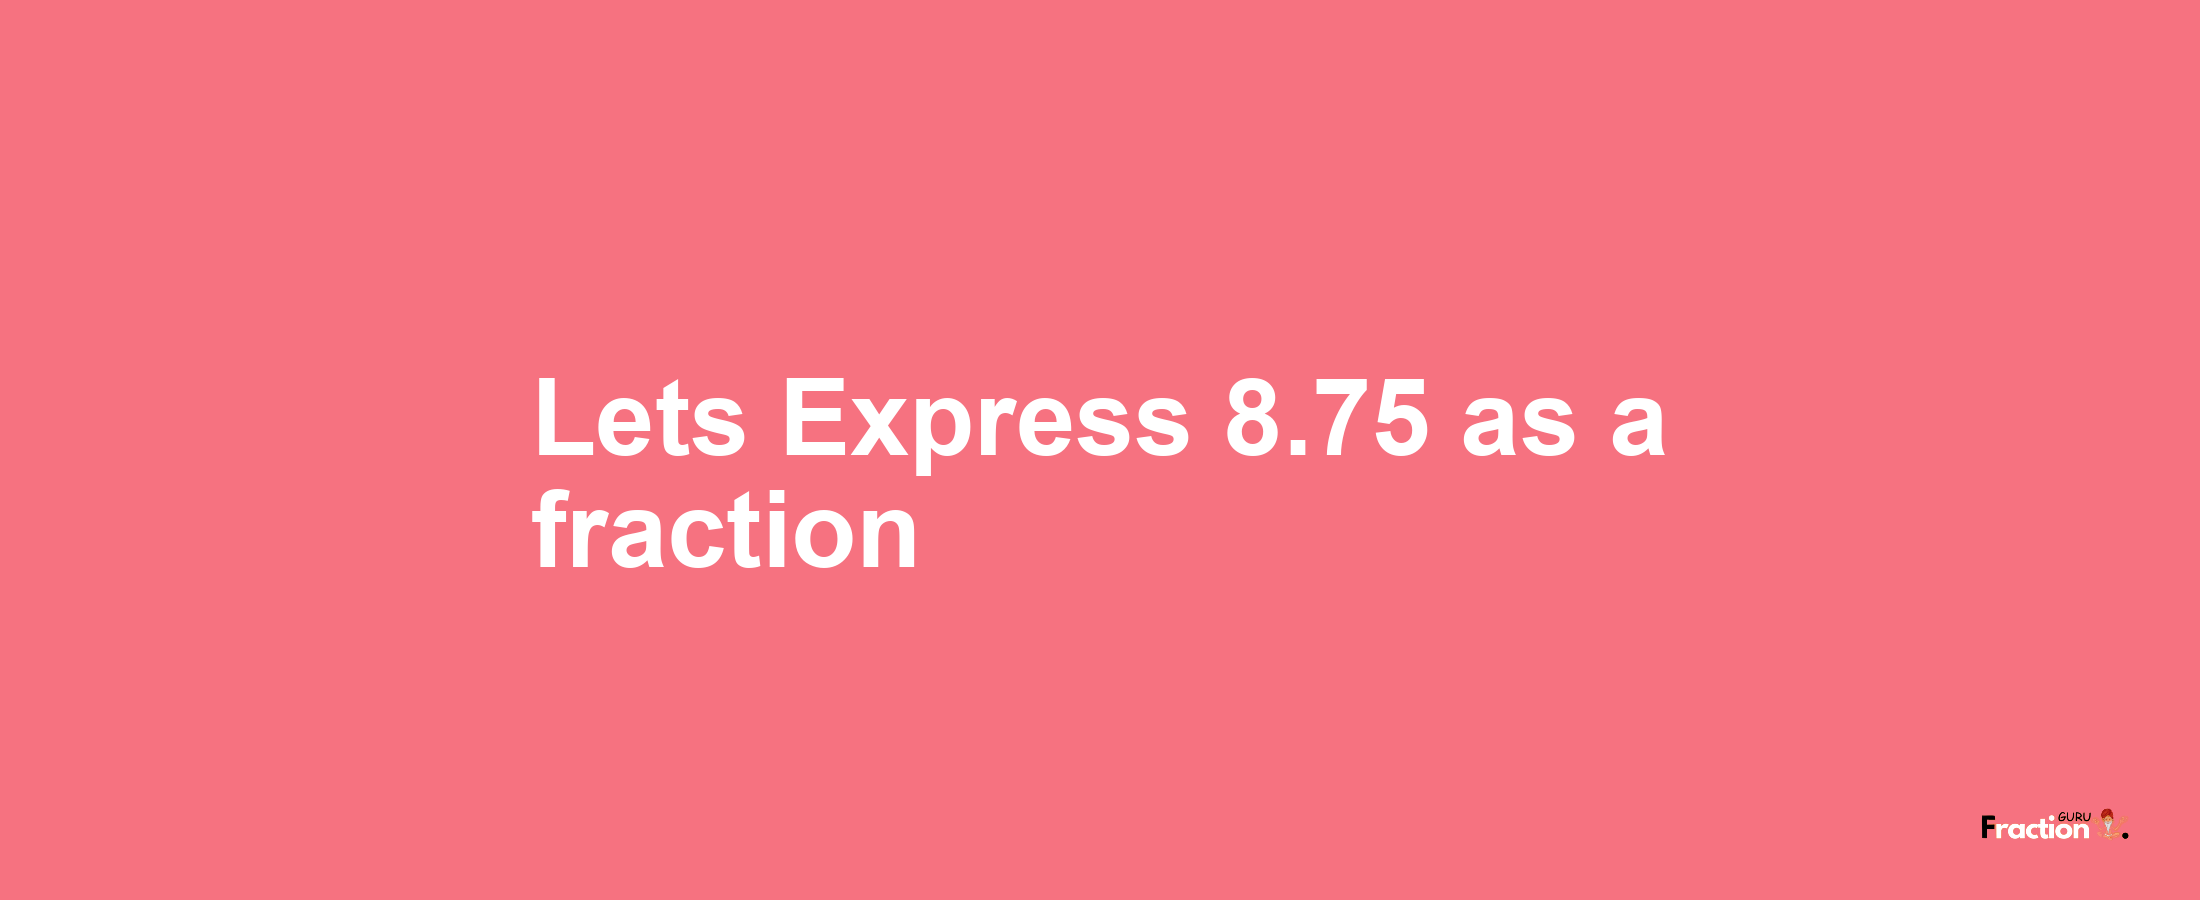 Lets Express 8.75 as afraction